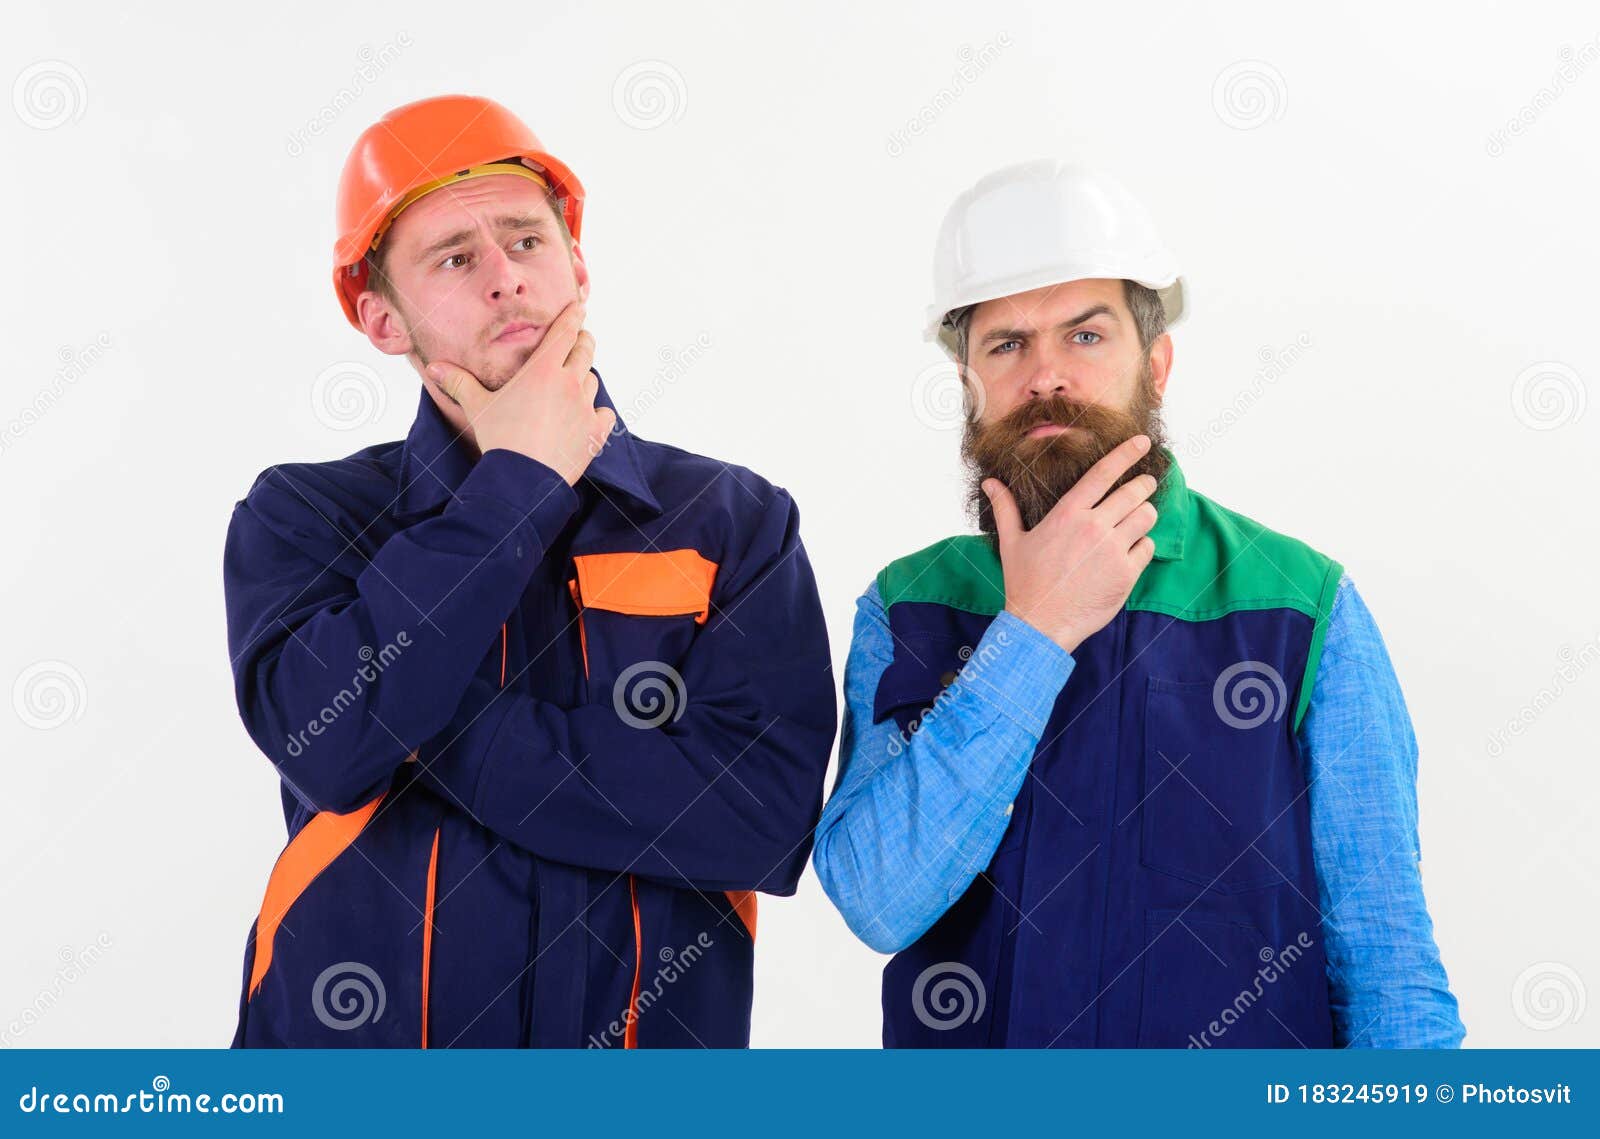 https://thumbs.dreamstime.com/z/intellectual-work-concept-men-hard-hats-uniform-builders-ready-to-work-isolated-white-background-builder-architect-engineer-183245919.jpg